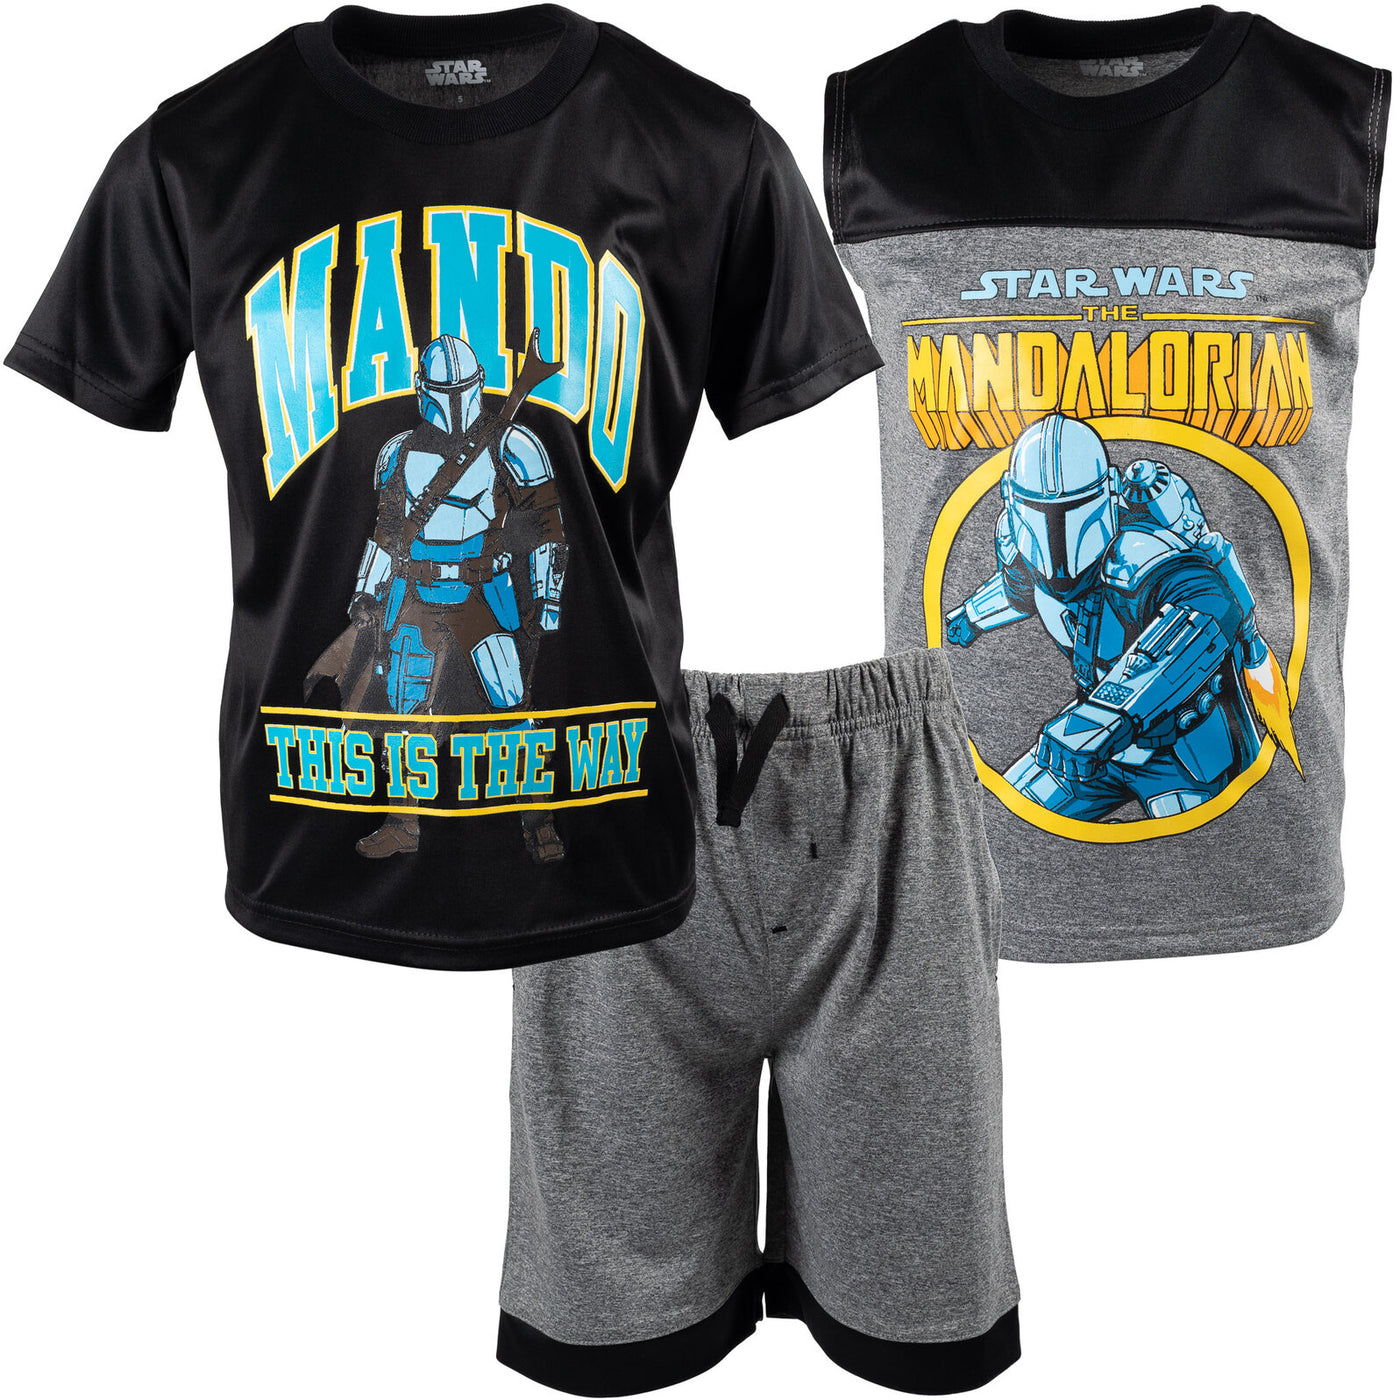 Star Wars The Mandalorian Athletic Pullover T-Shirt Tank Top and Shorts 3 Piece Outfit Set Little Kid to Big Kid